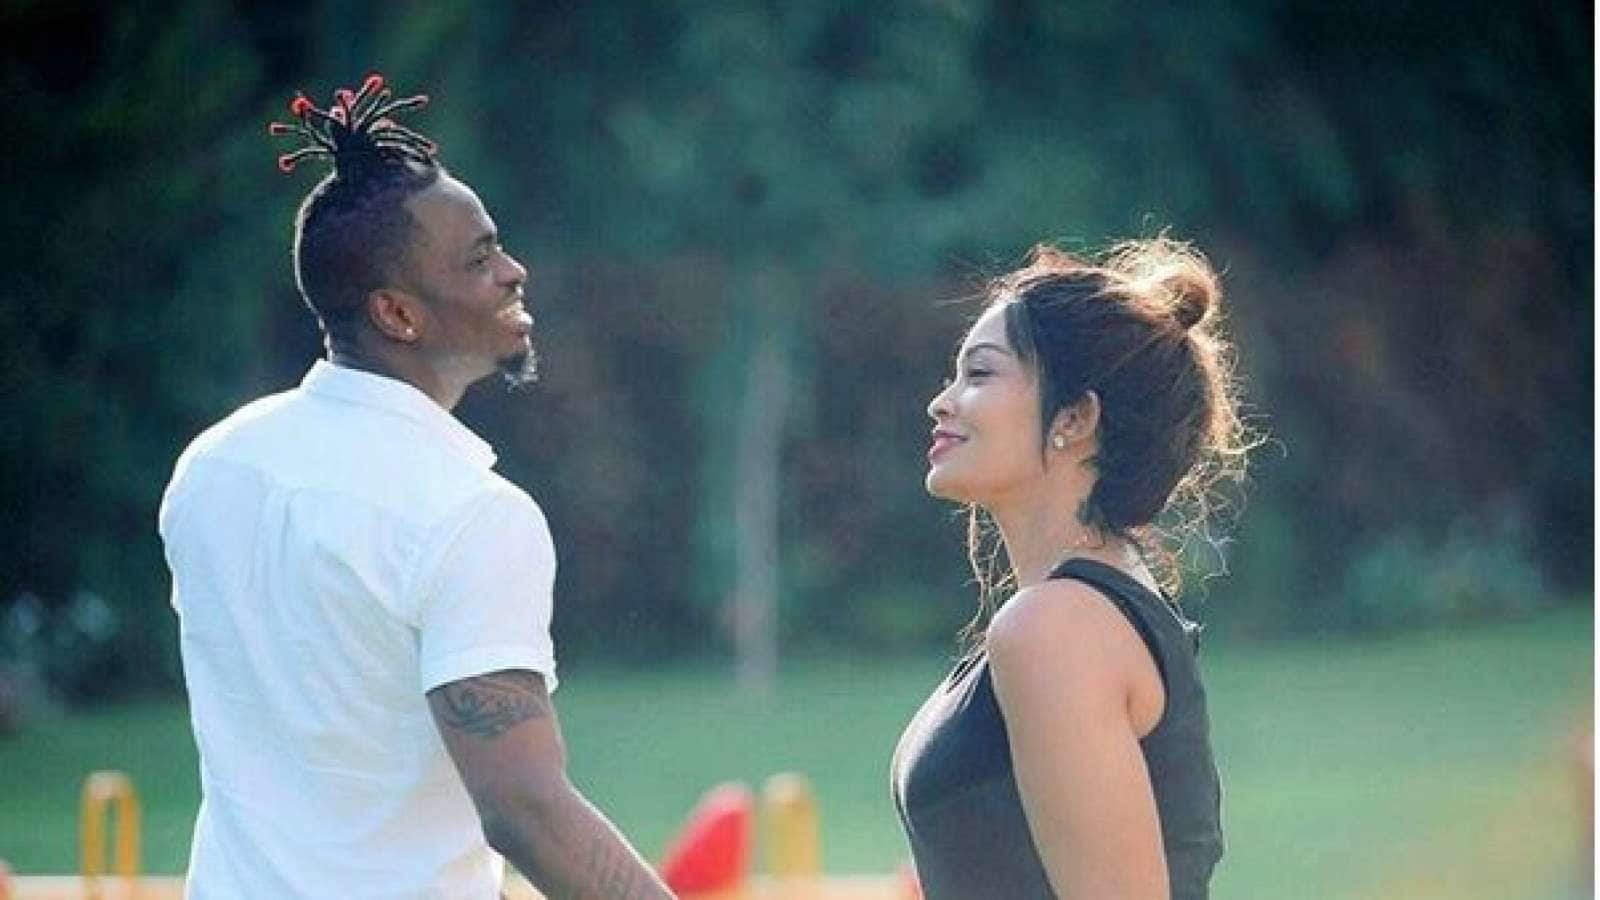 Zari fires back with calm reply after Diamond called her a ‘thirsty monkey’ 